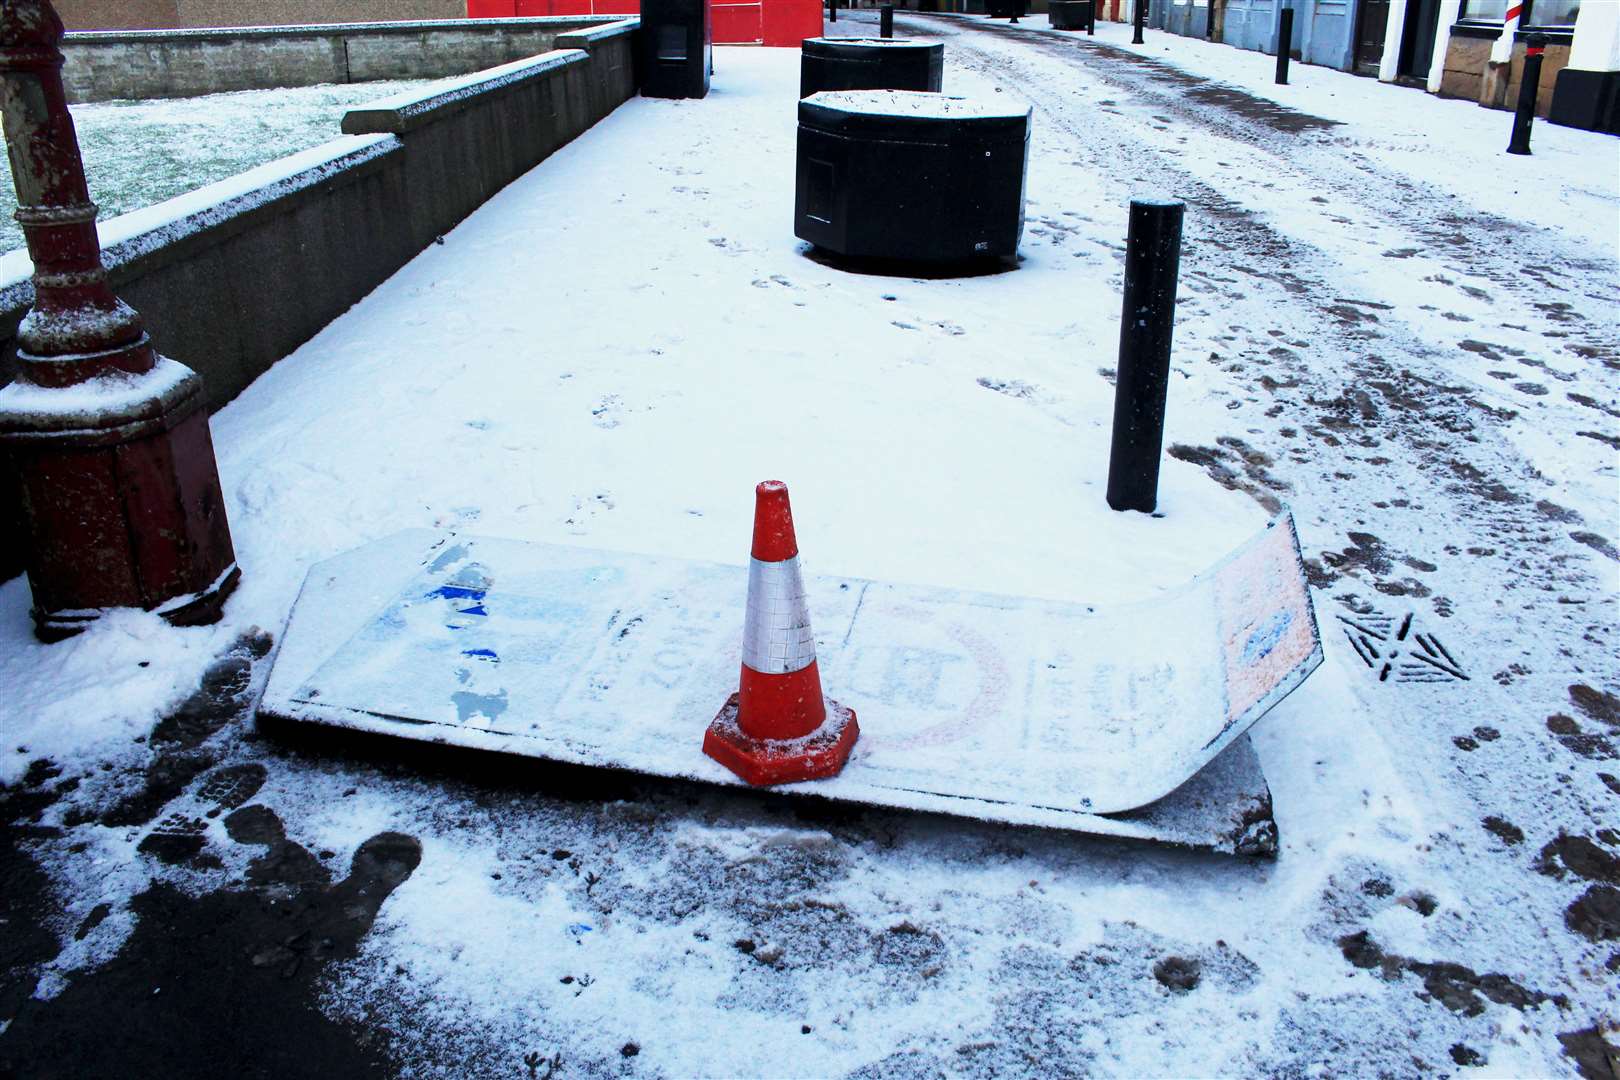 A 'pedestrian zone' sign was knocked flat at the eastern entrance to High Street in Wick.